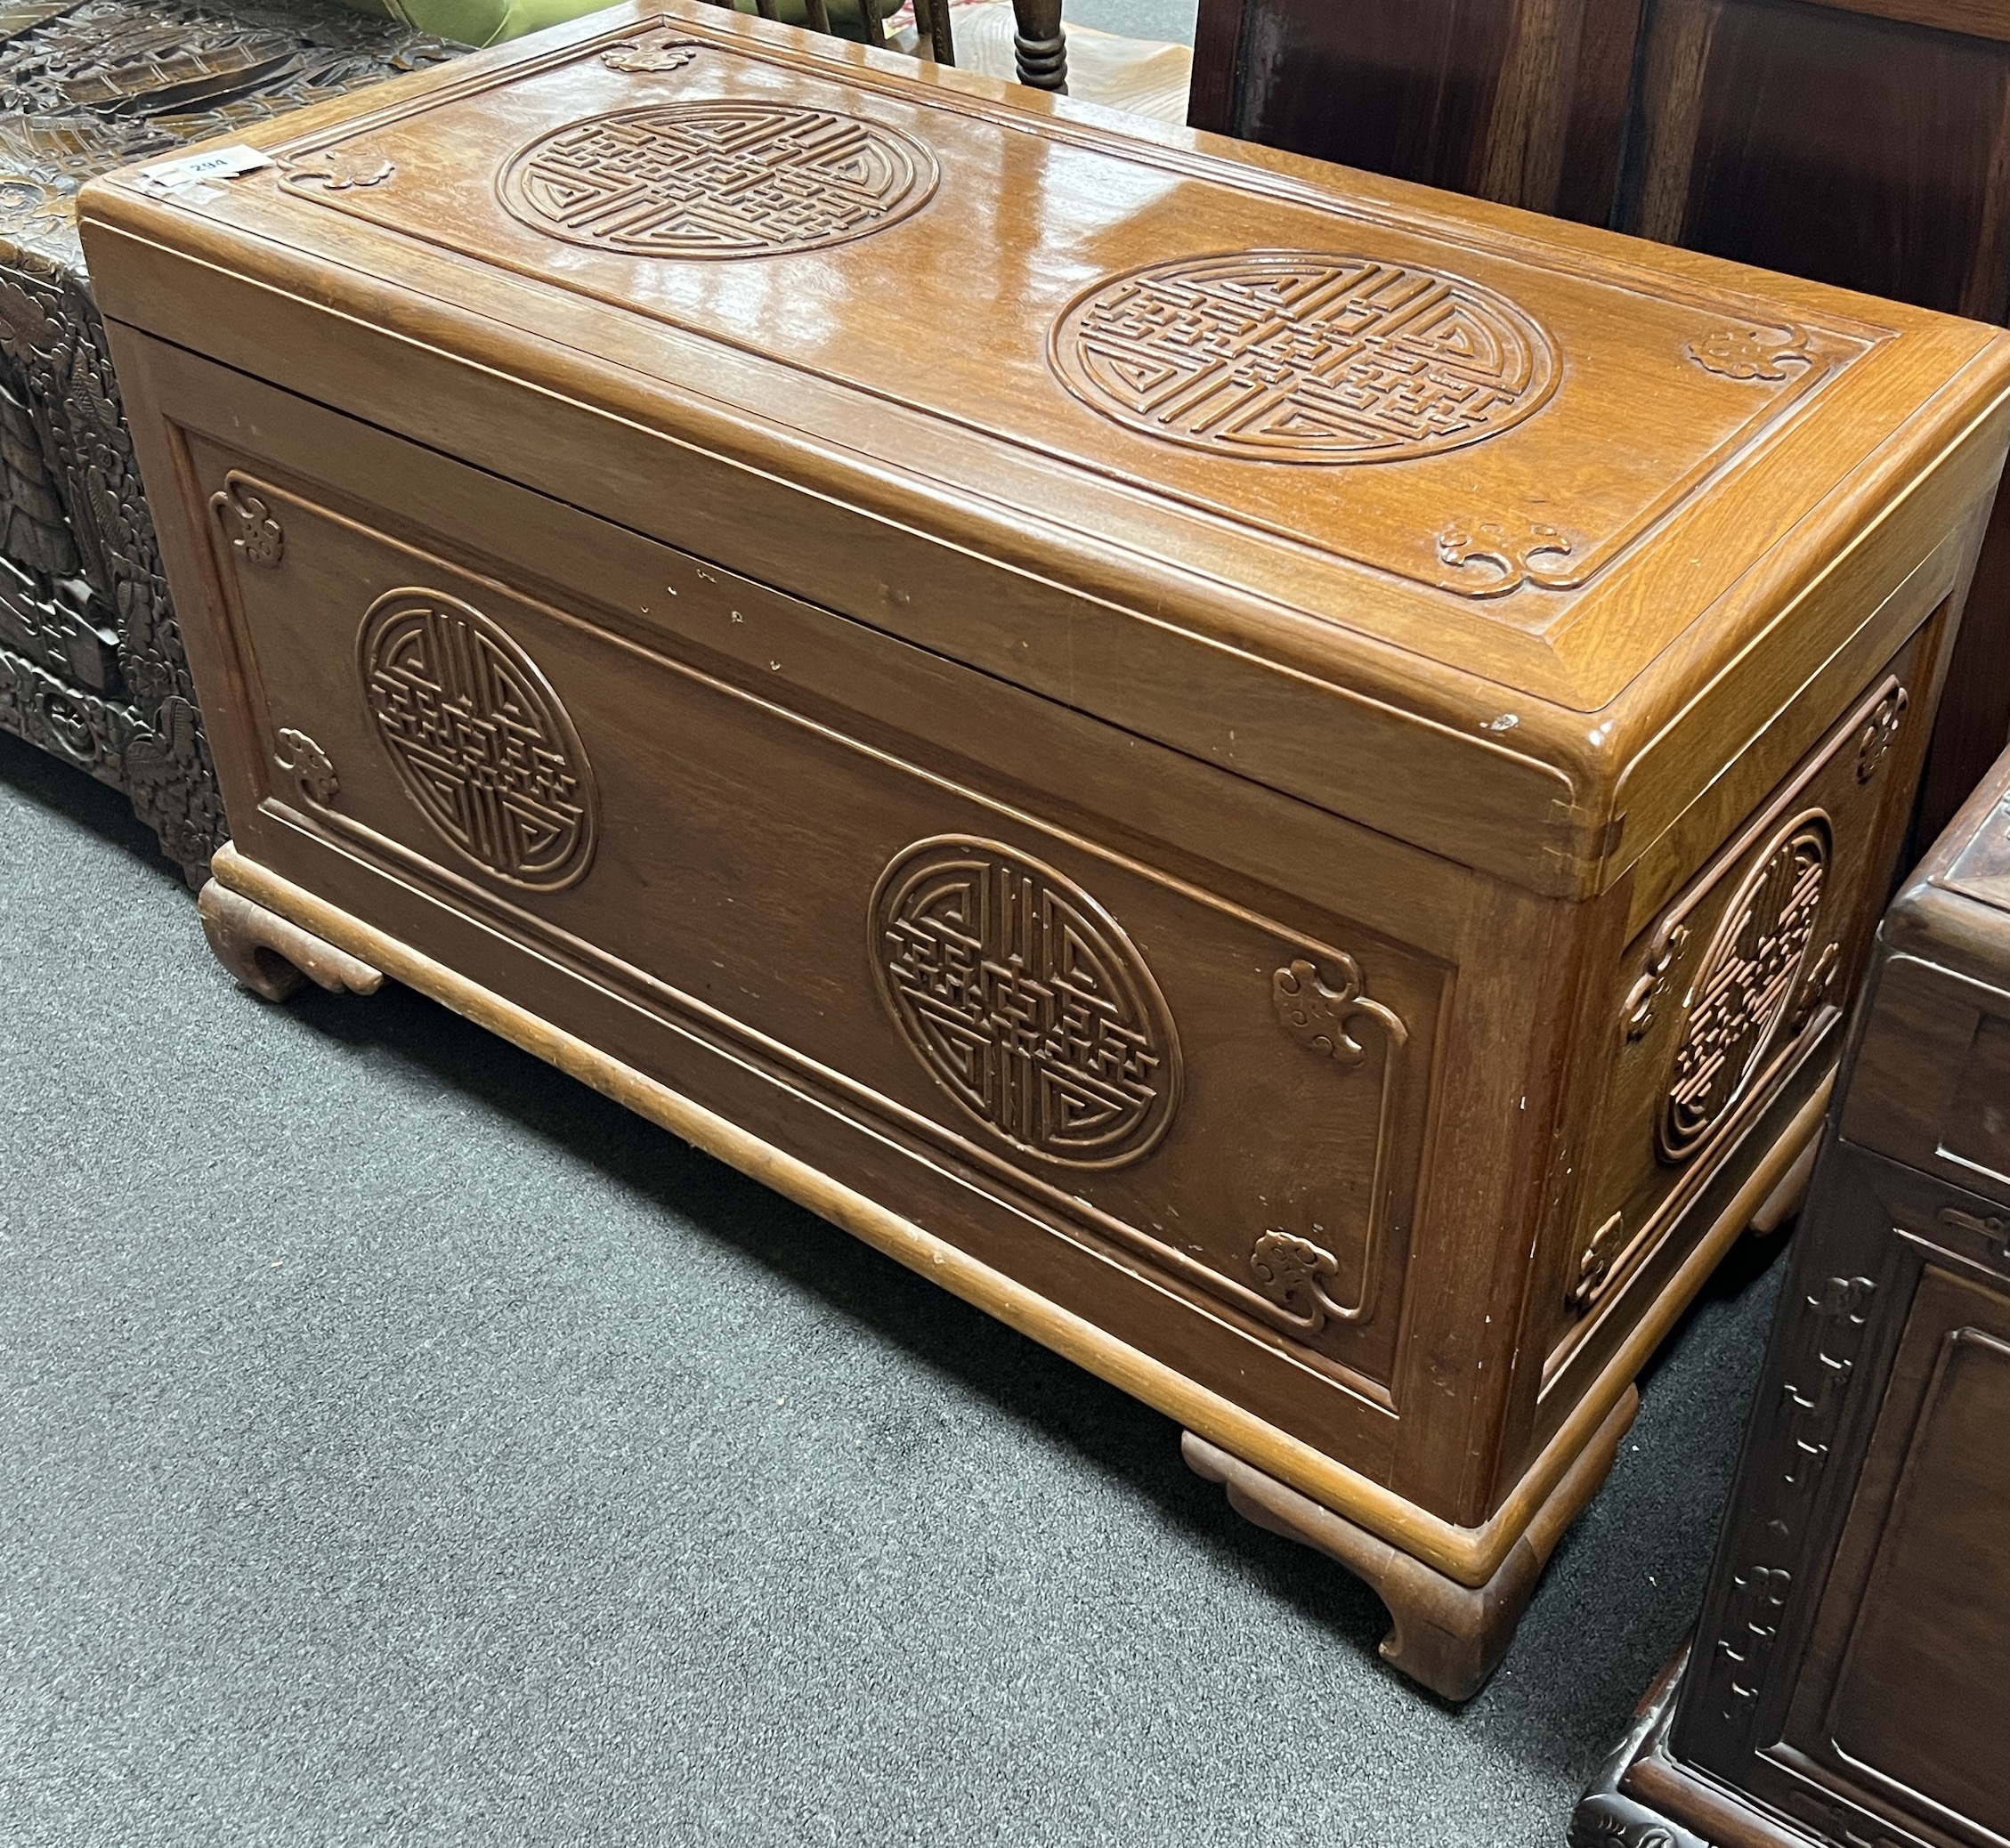 An Asian lacquered carved camphorwood trunk, length 101cm, depth 49cm, height 61cm